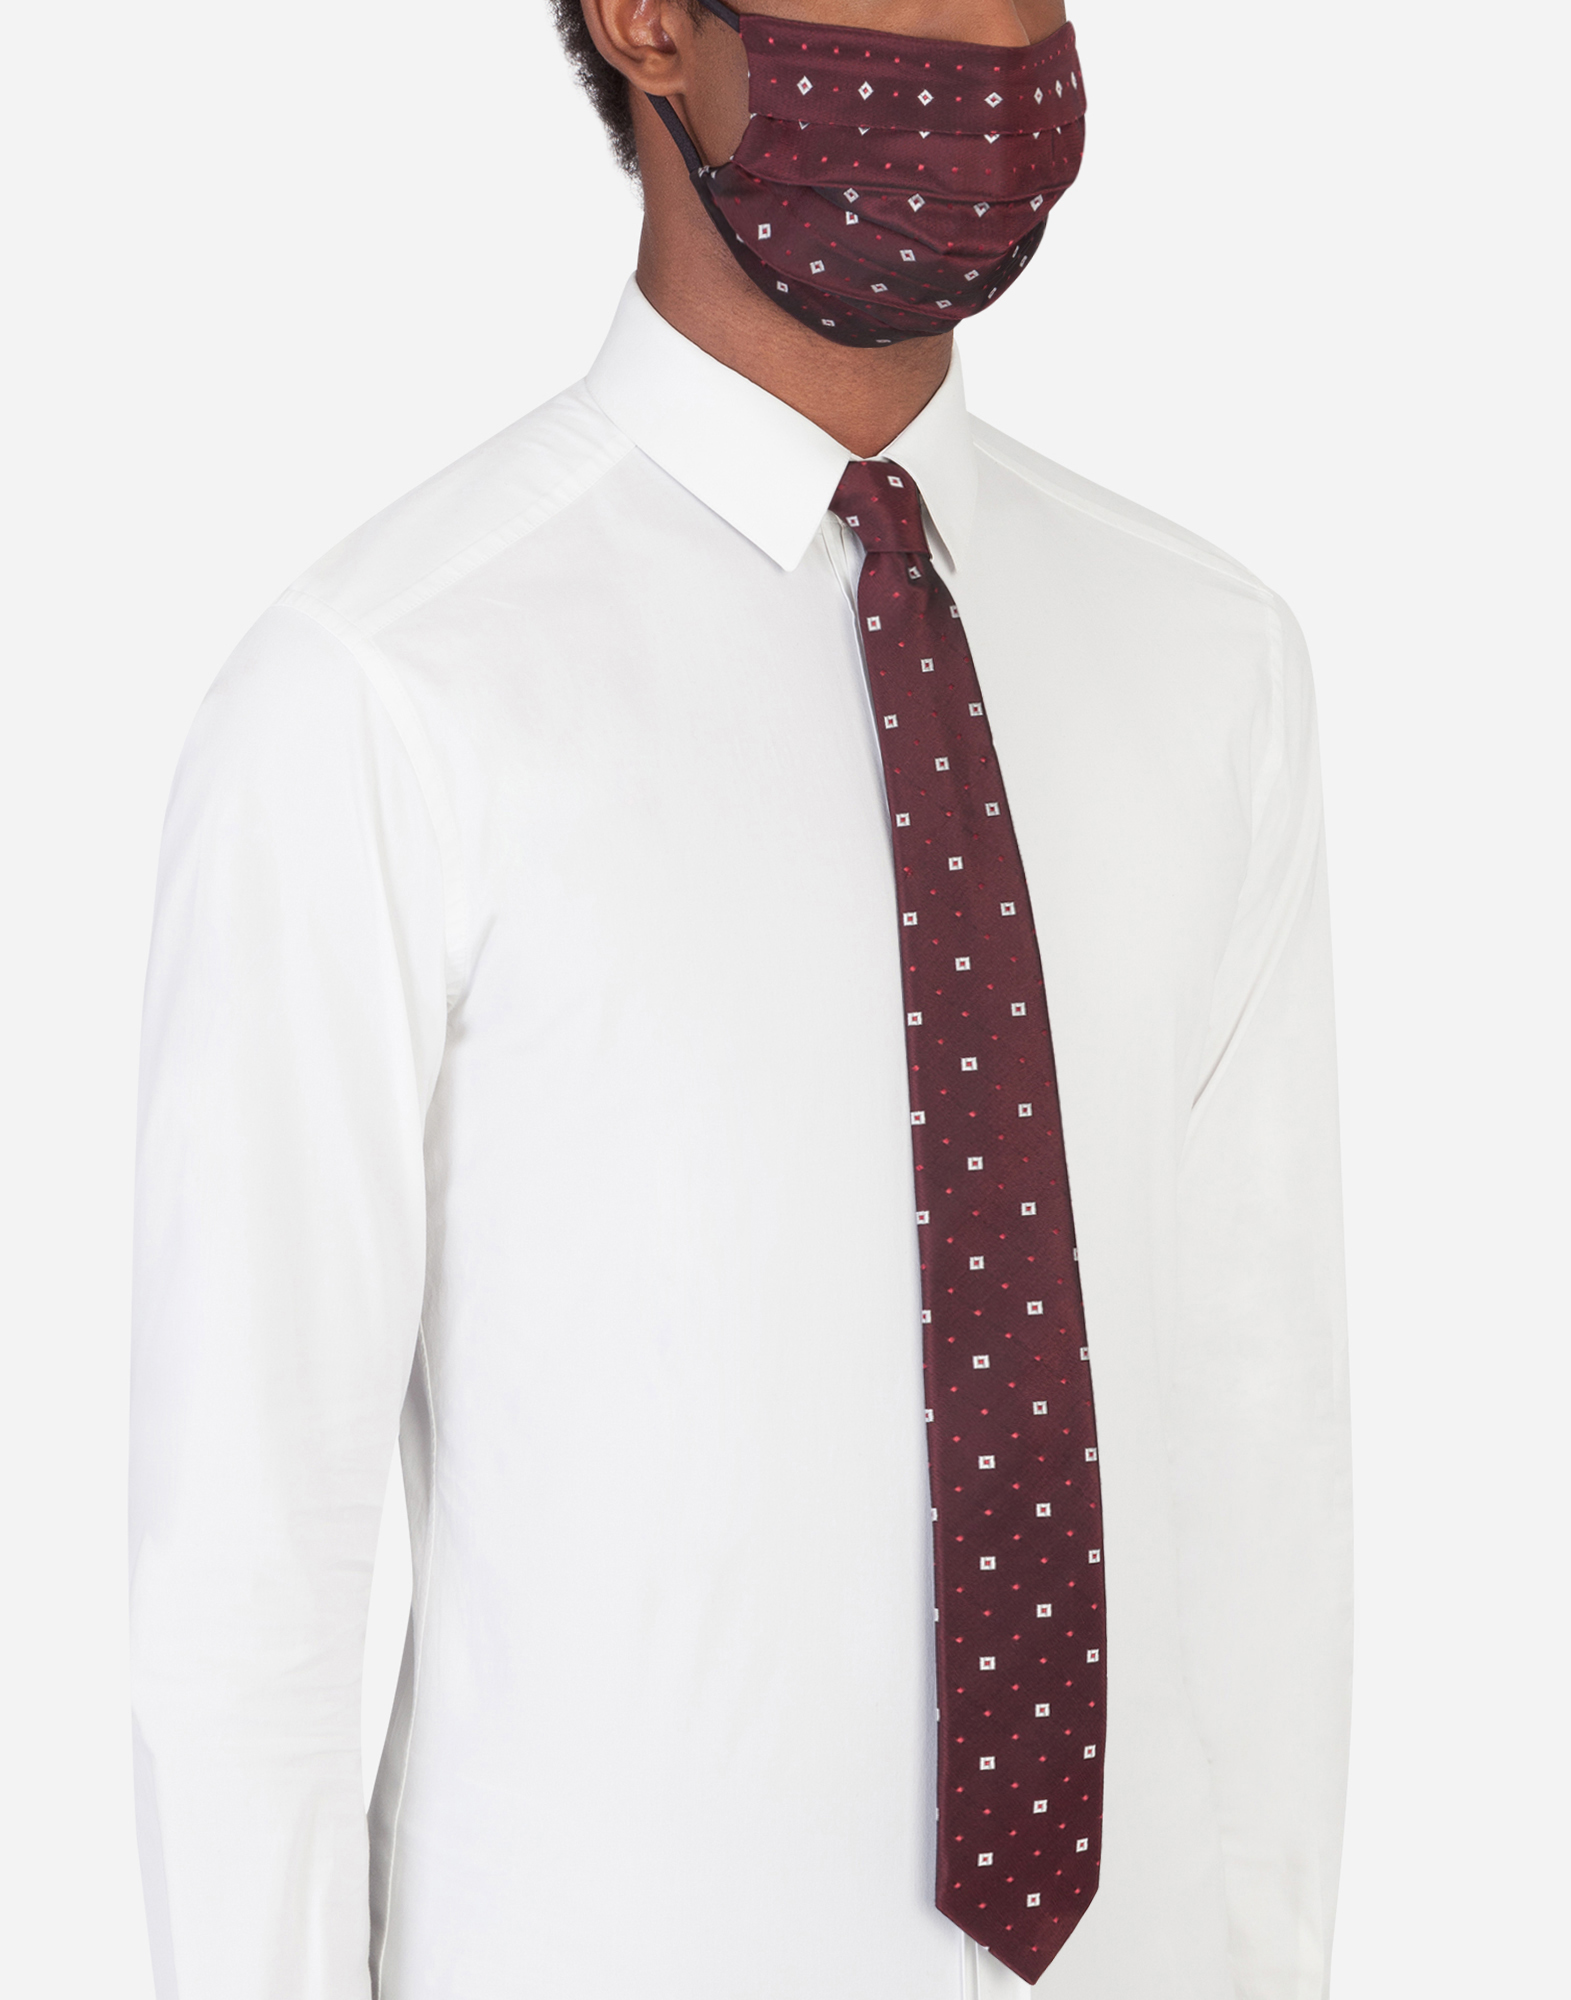 Geometric jacquard face mask and tie set in Bordeaux